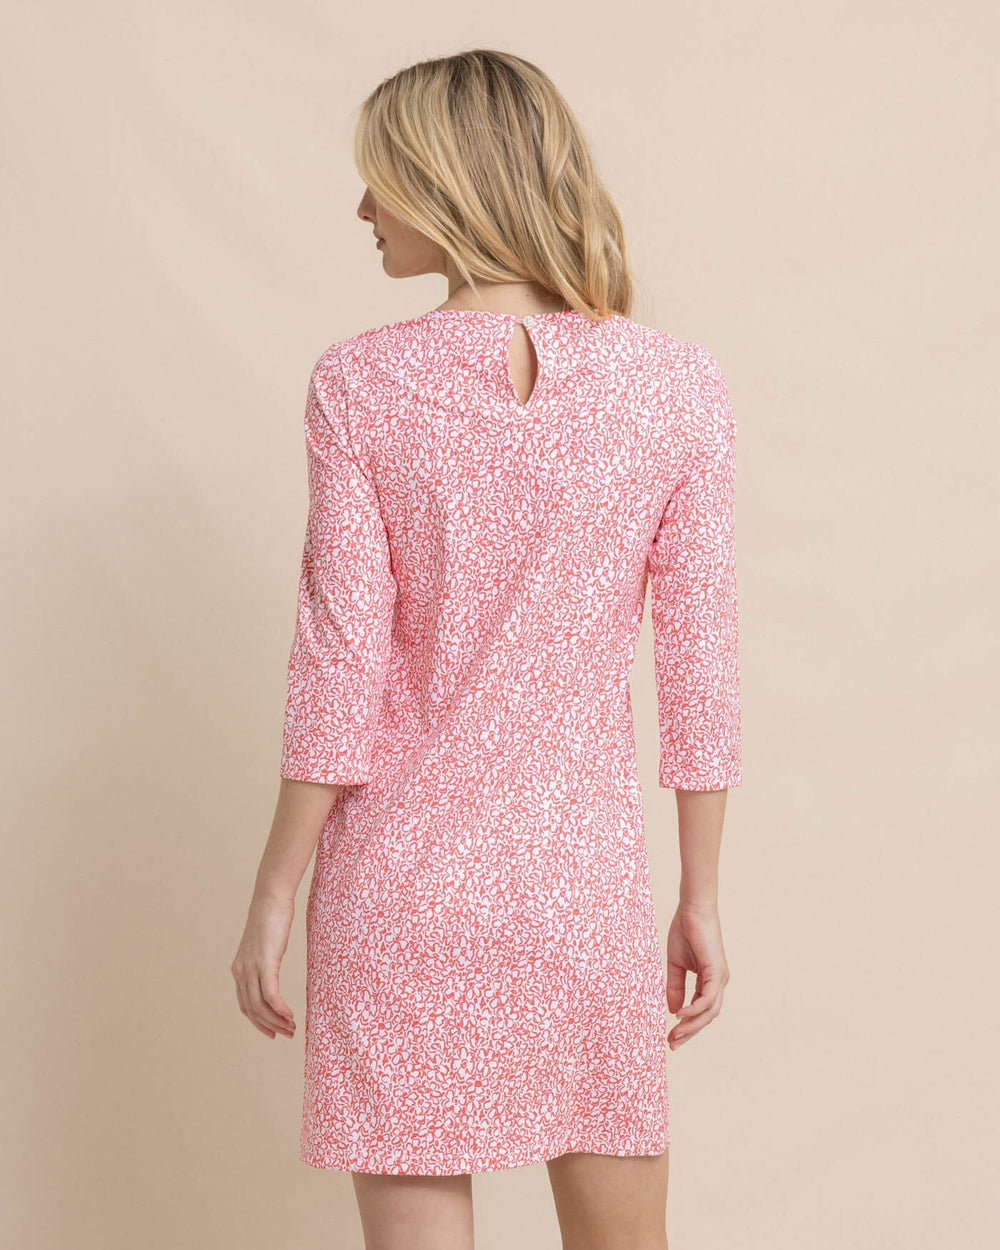 The back view of the Southern Tide Leira That Floral Feeling Print Performance Dress by Southern Tide - Conch Shell